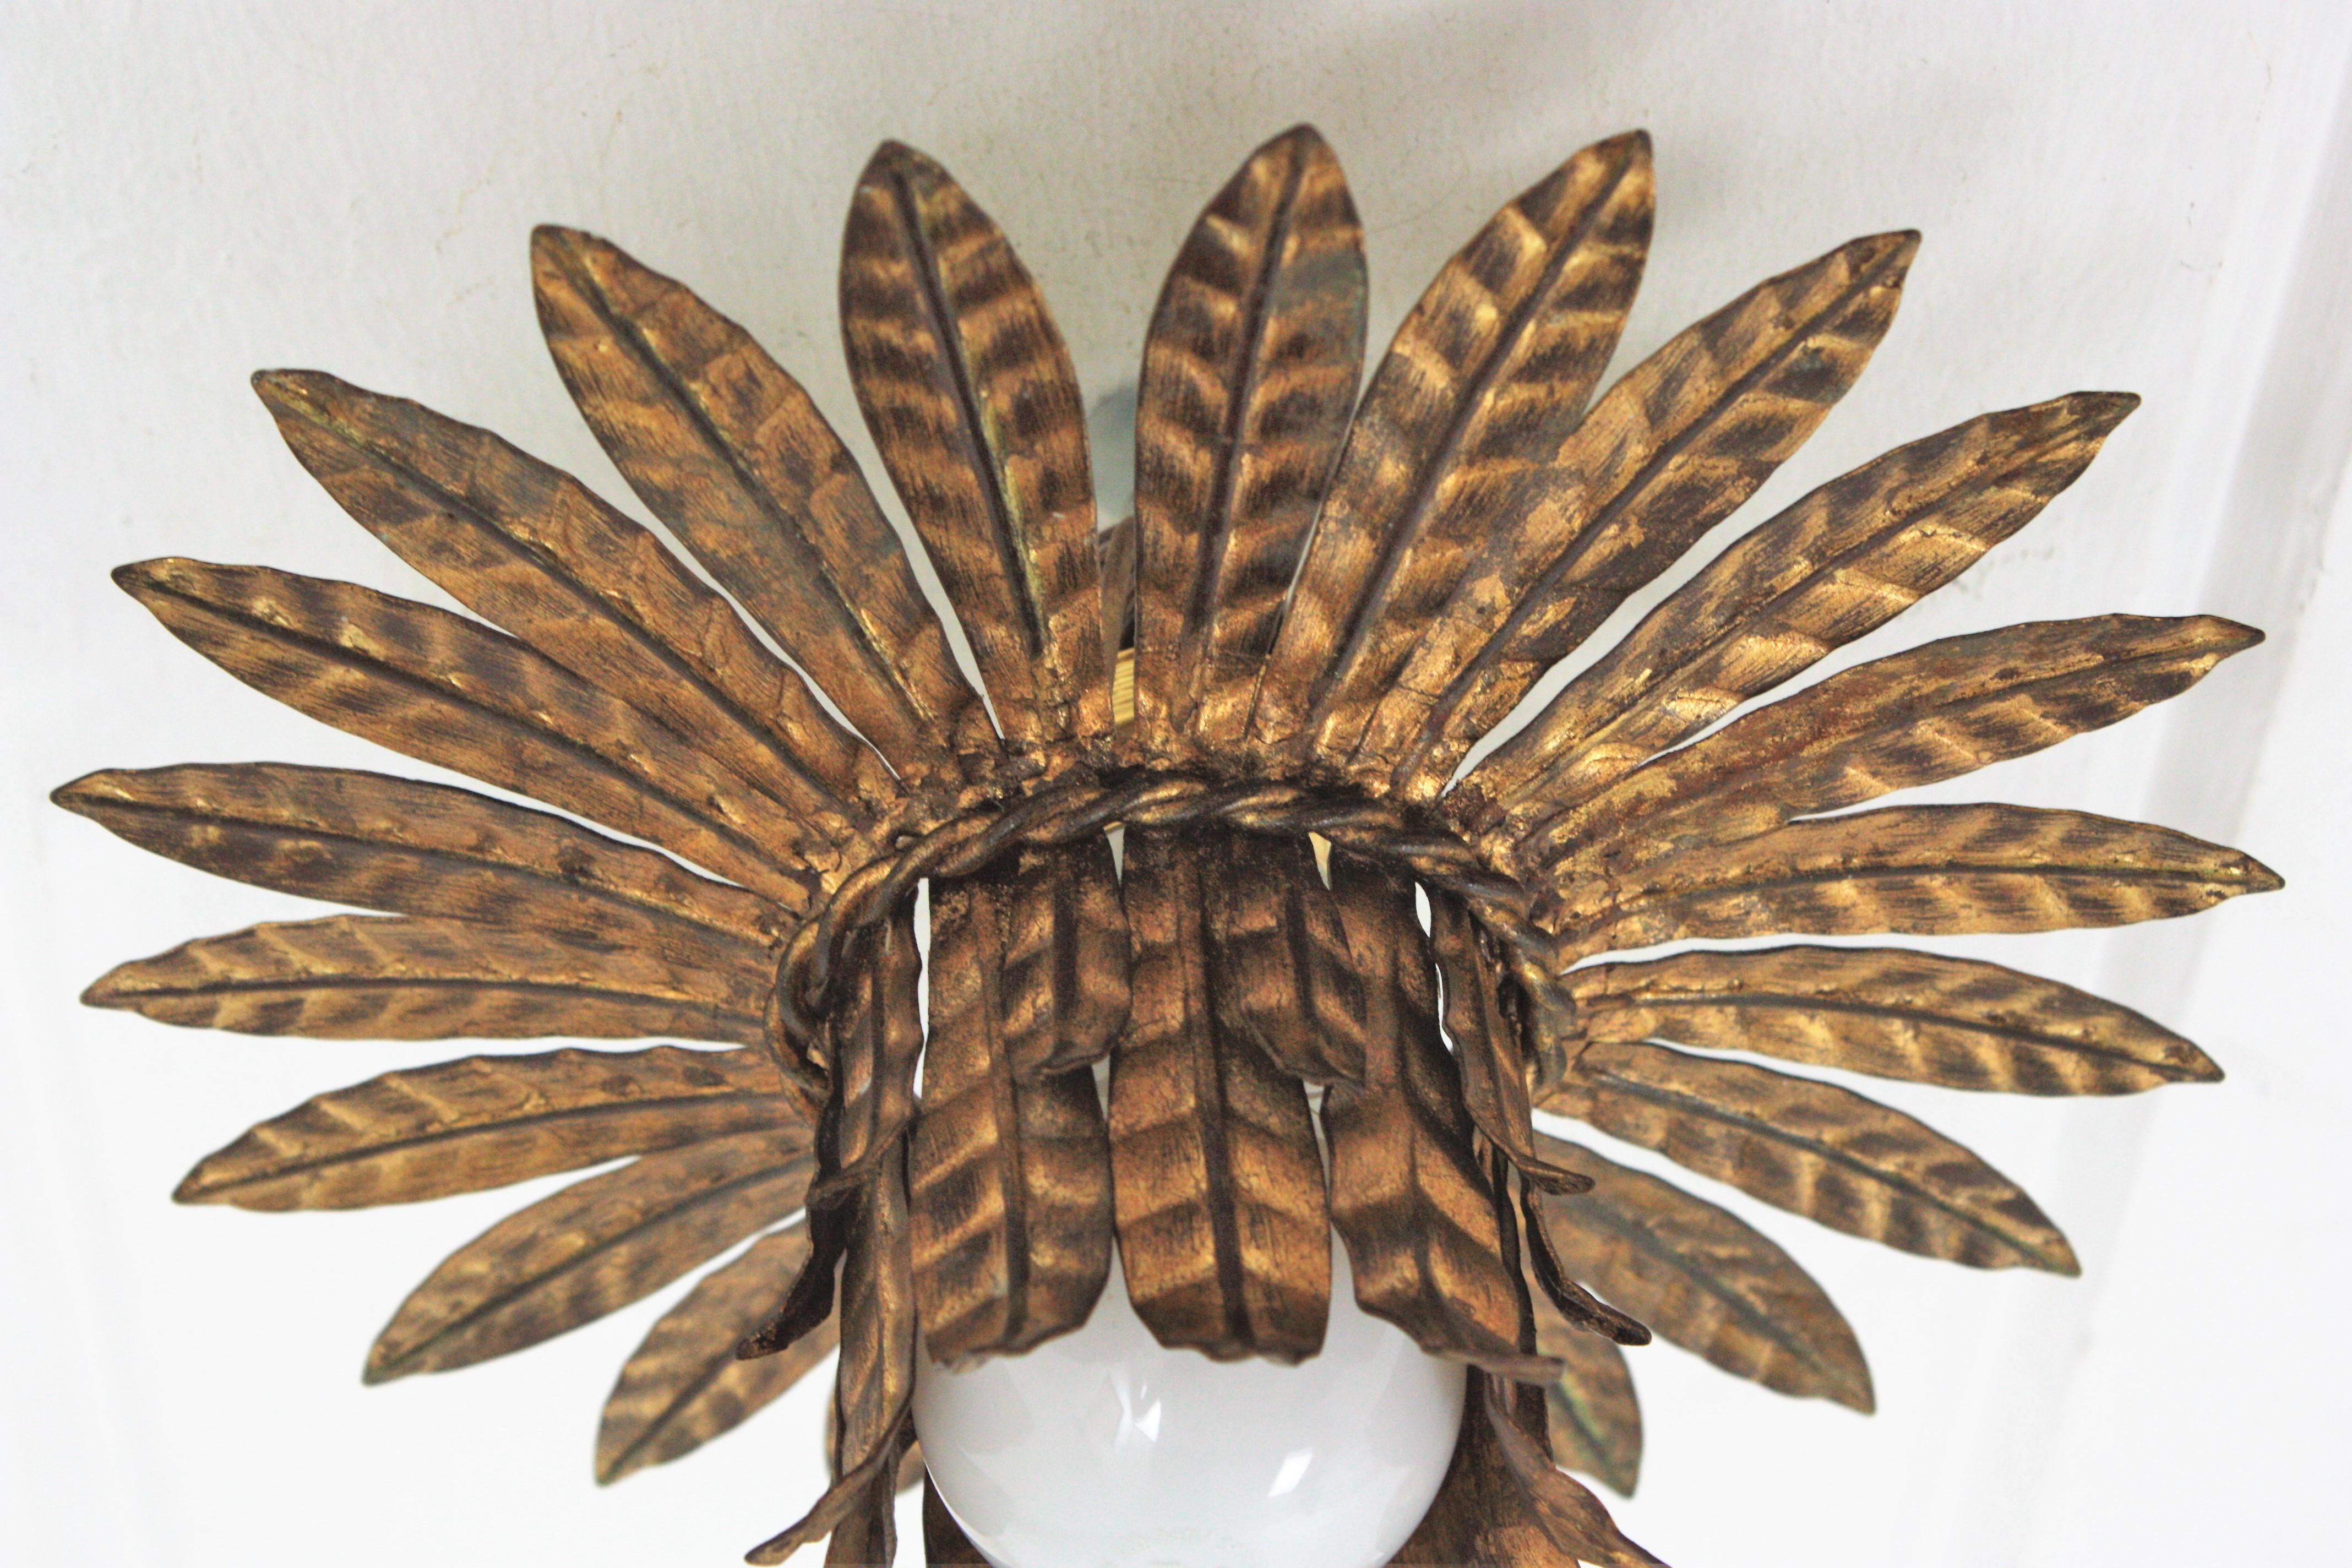 French Leaves Bouquet Crown Ceiling Light Fixture in Gilt Iron, 1940s For Sale 8